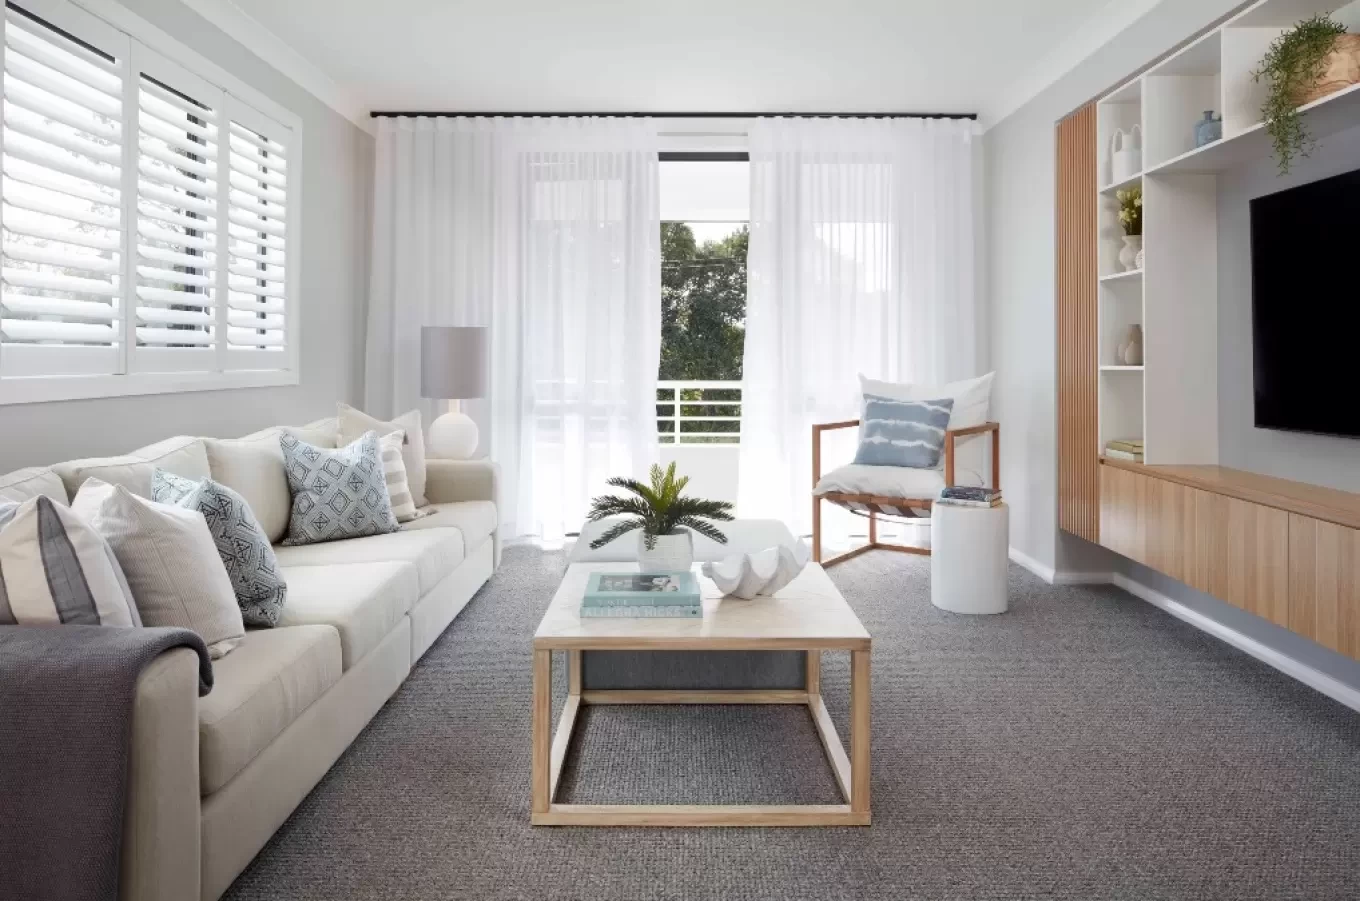 nsw Collections Sapphire SC_Double_Storey Stamford Stamford-38 SC-Stamford-38-Interiors stamford-july-012